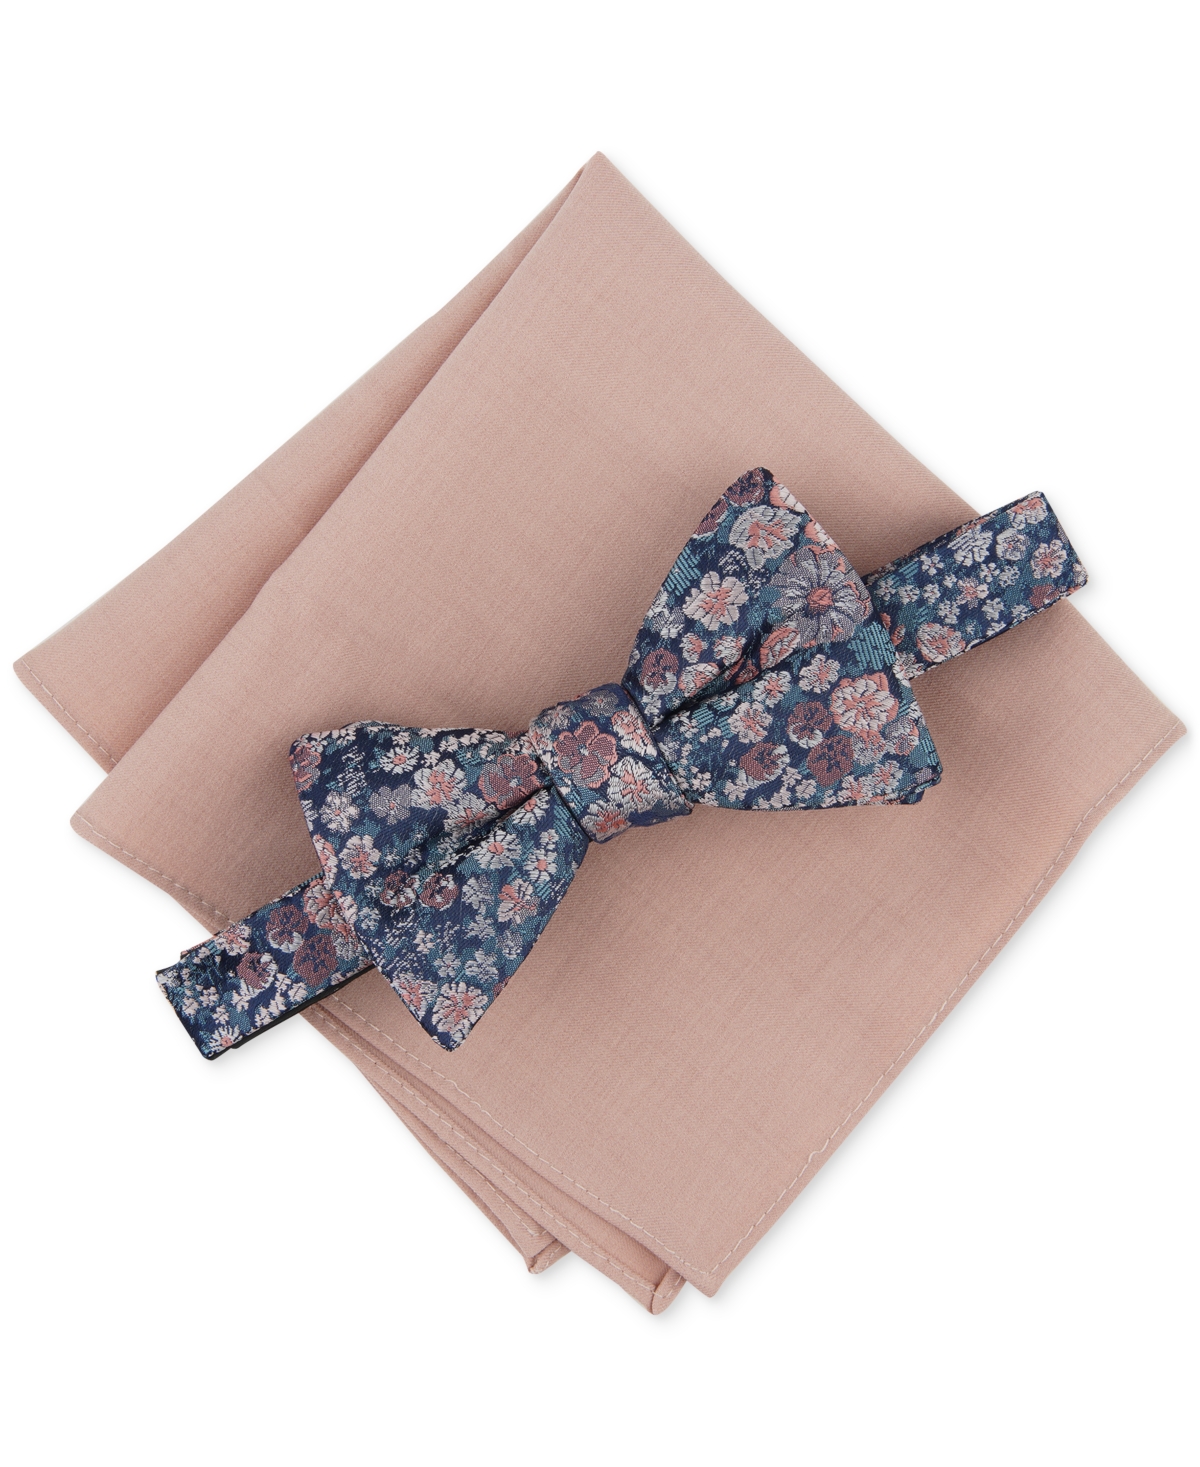 Men's Charland Floral Bow Tie & Solid Pocket Square Set, Created for Macy's - Peach